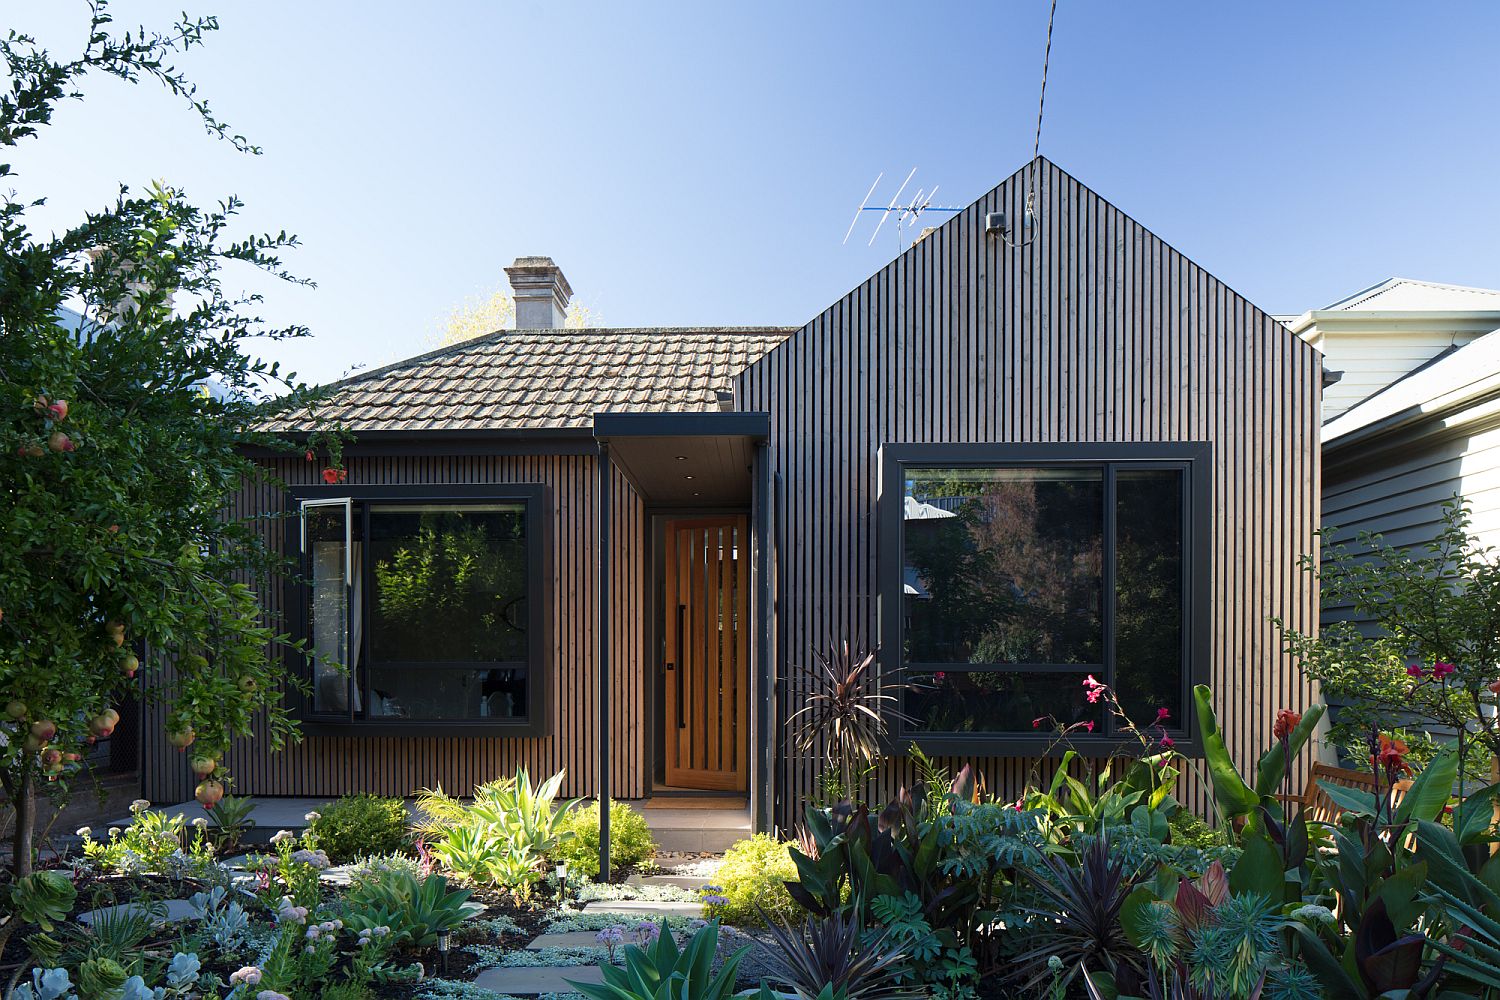 This Revived Victorian Cottage with a Rear Addition is Full of Light and Modernity!